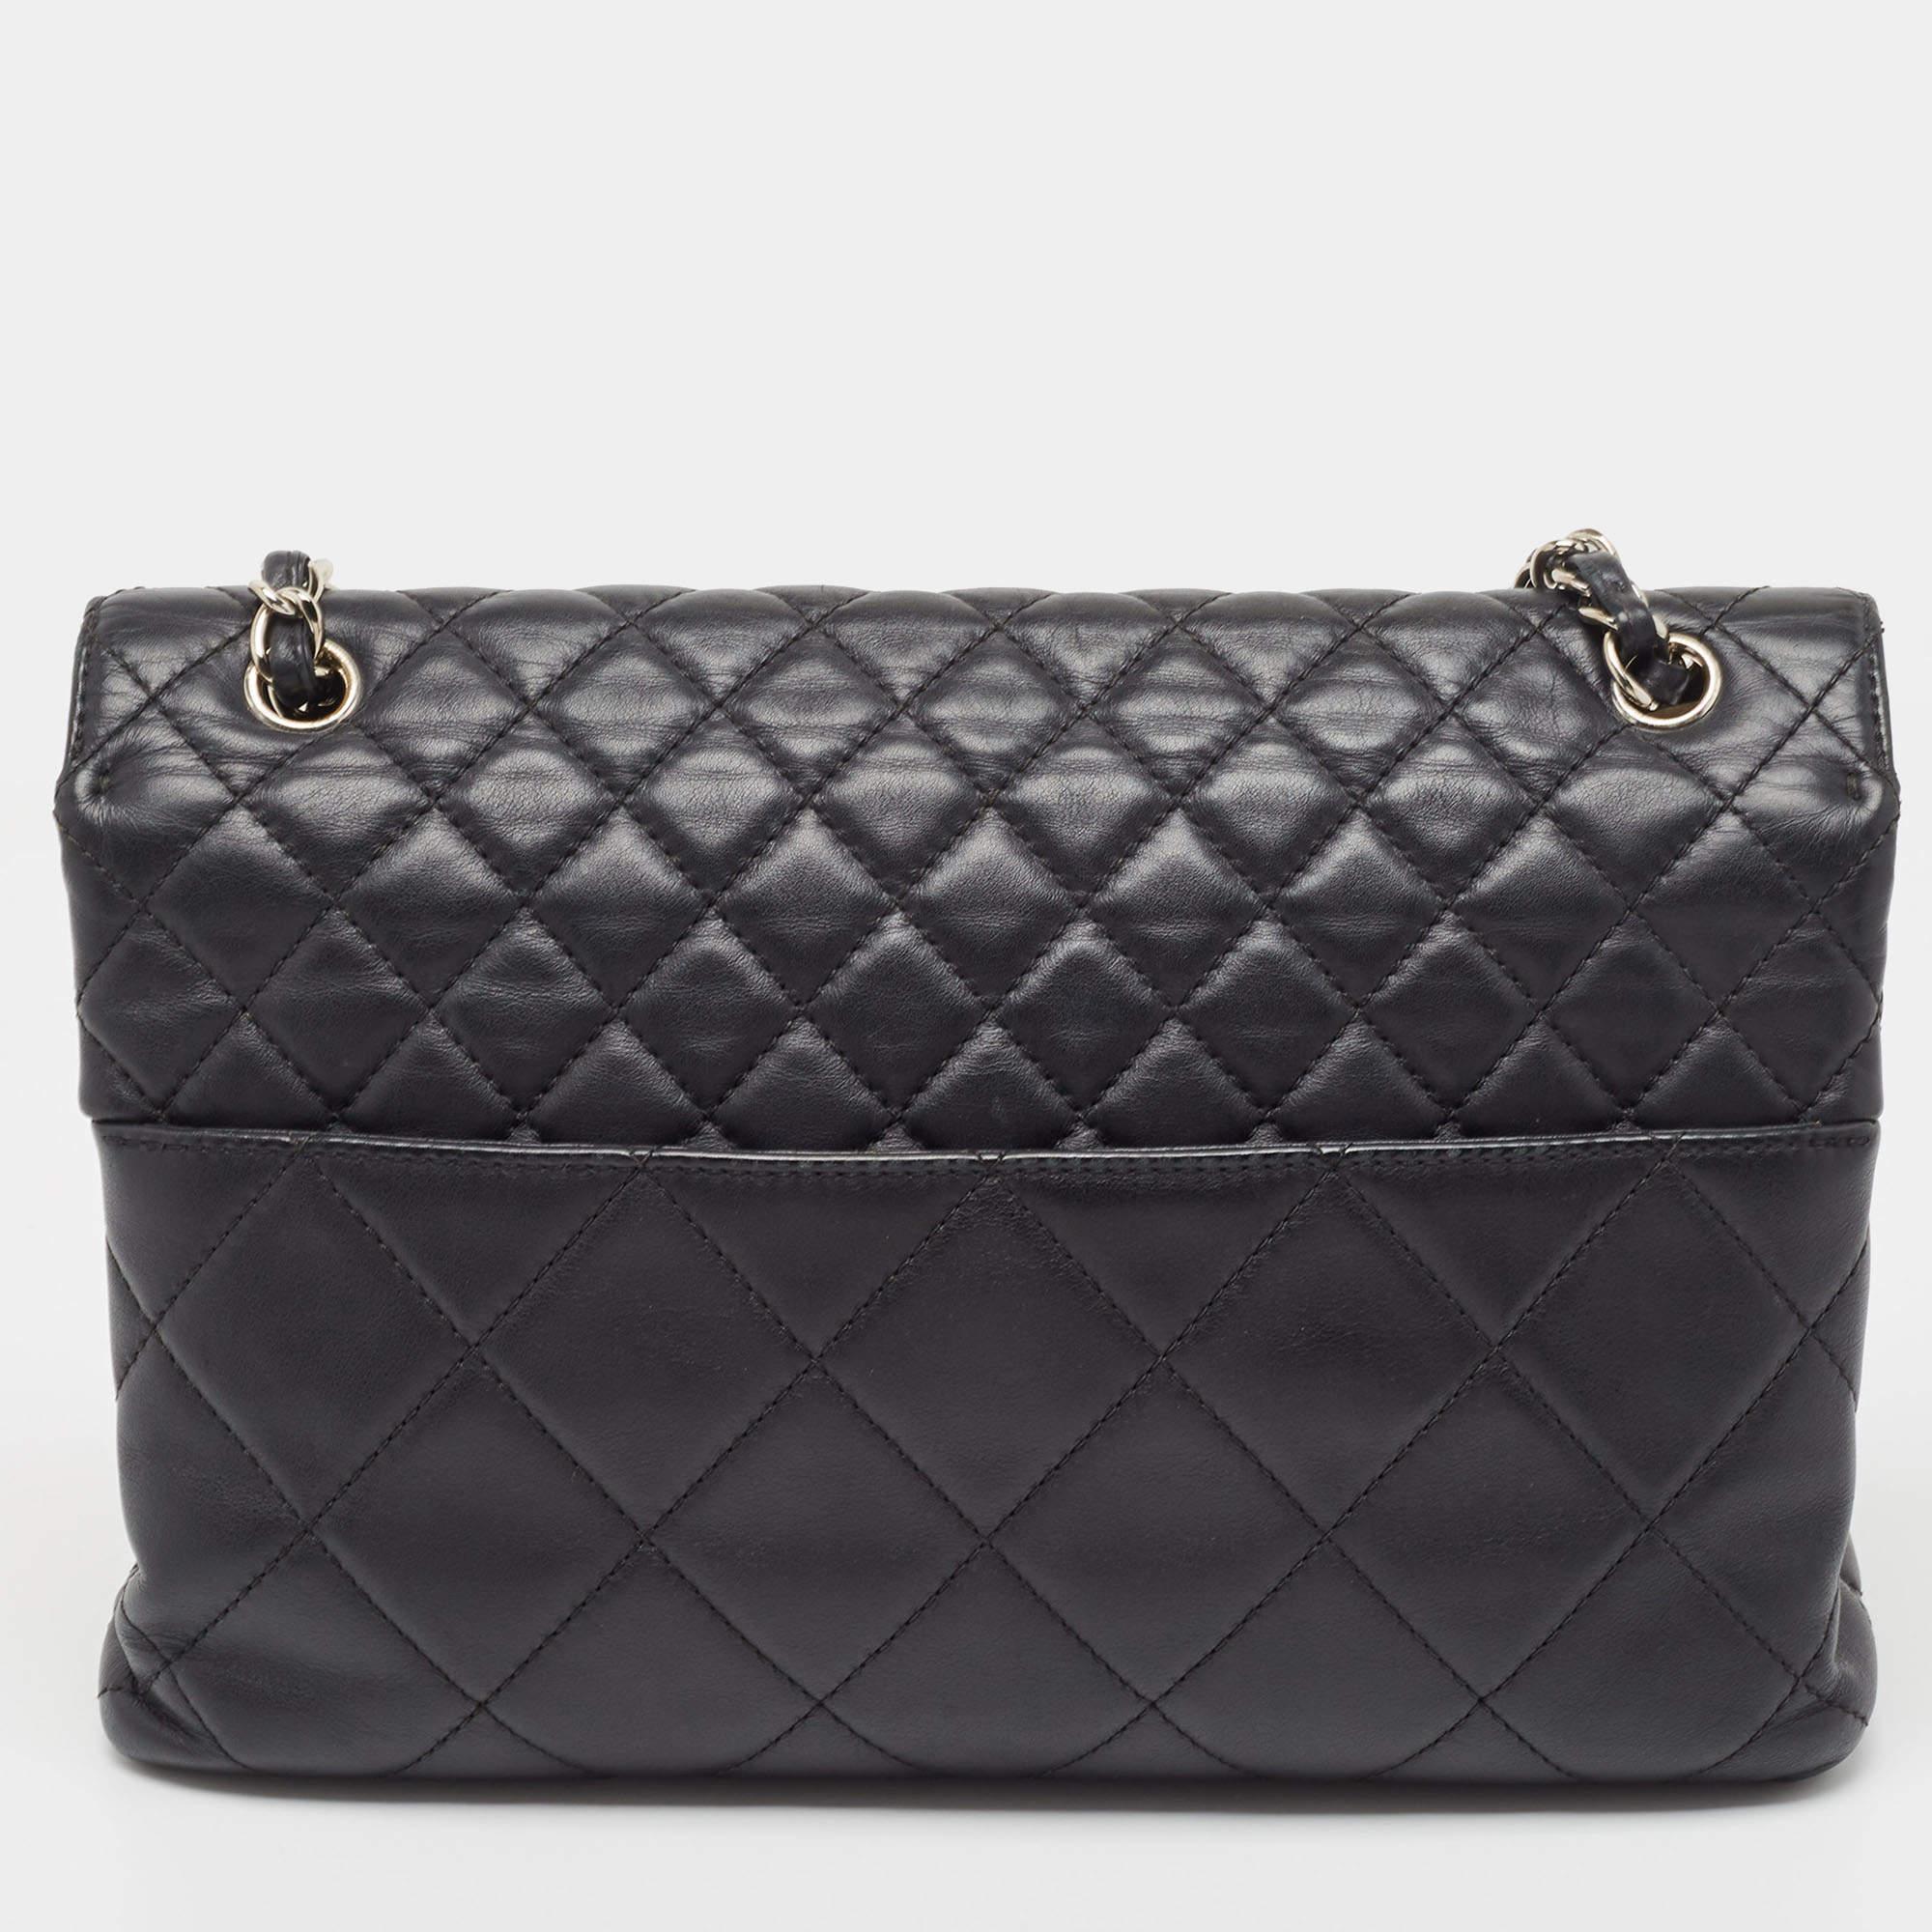 Chanel's In The Business flap bag is a sophisticated edition of the label's iconic creation. Crafted in leather, it is accented with quilted details. The bag features the CC logo and silver-tone hardware. It is lined with fabric.

